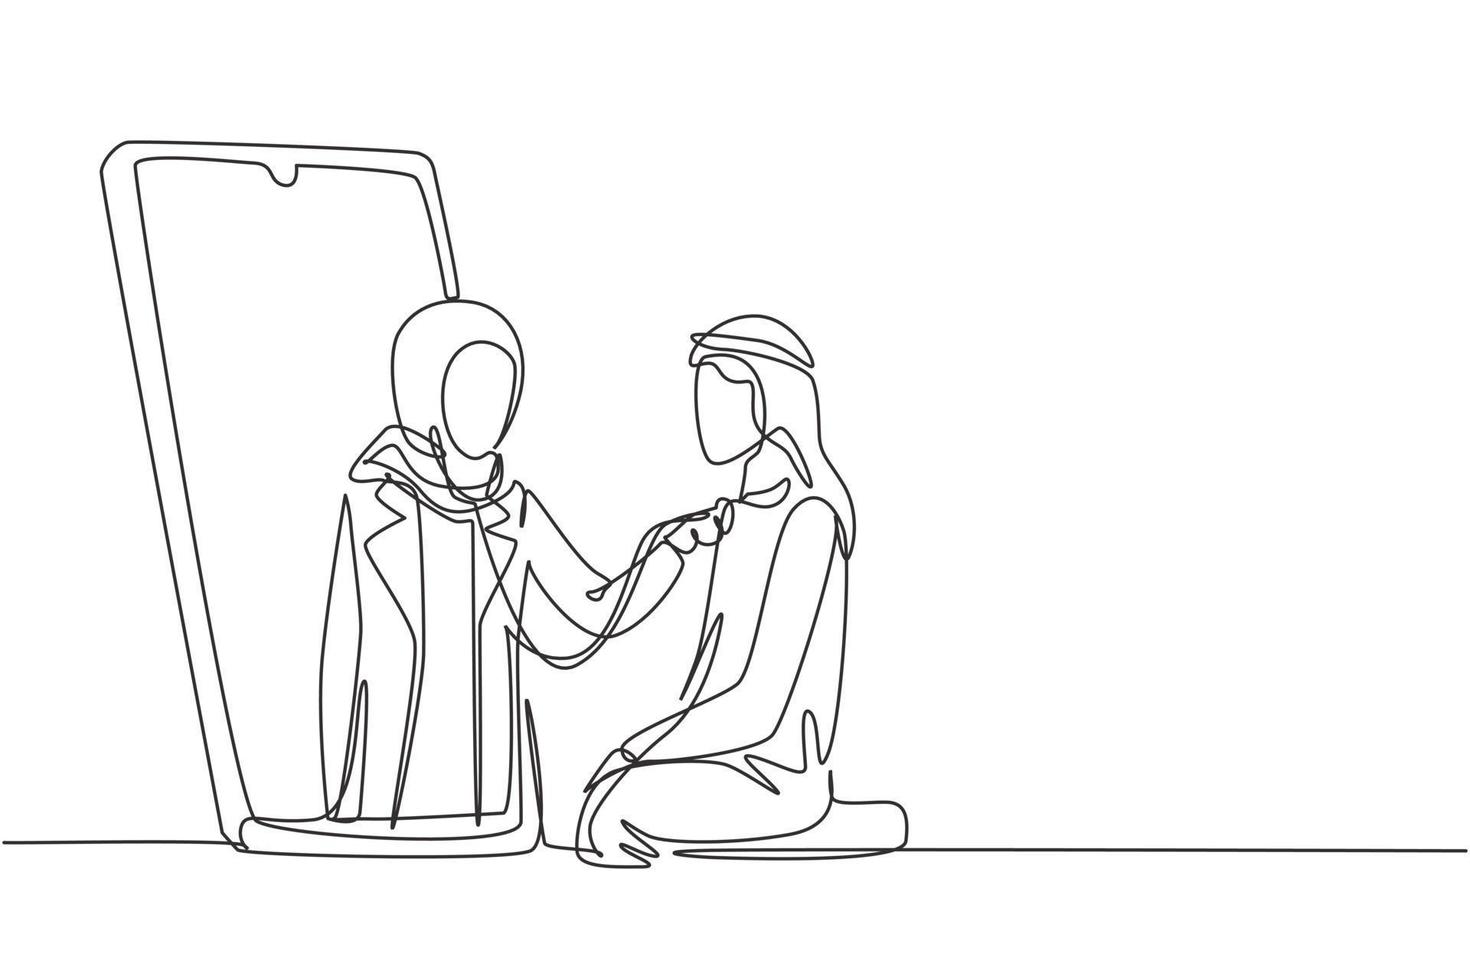 Single continuous line drawing hijab female doctor comes out of smartphone screen and checks male patient's heart rate using stethoscope sitting on chair. One line graphic design vector illustration